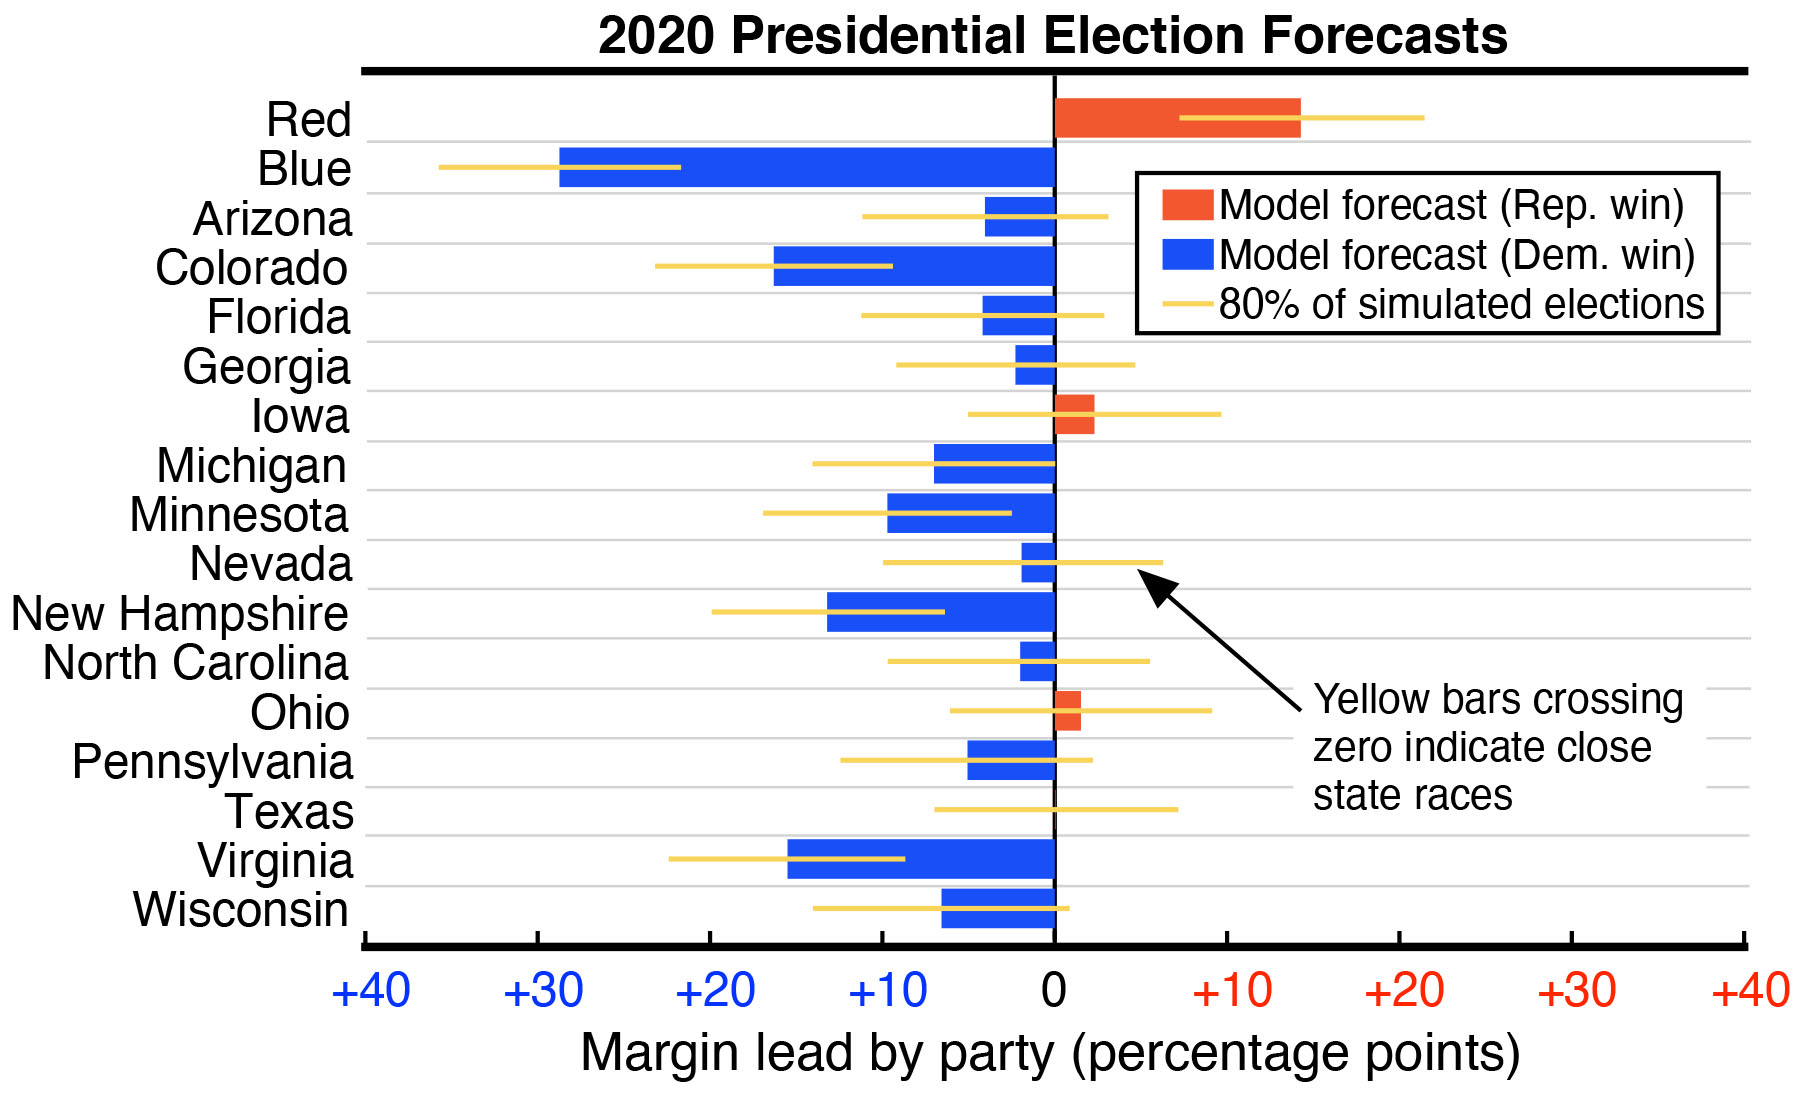 Figure 2: Forecast of the 2020 U.S. presidential election that was made on October 27 using the researchers’ model of infectious diseases. Senatorial and gubernatorial forecasts, as well as a link to the relevant code, are available at https://modelingelectiondynamics.gitlab.io/2020-forecasts. Figure courtesy of Samuel Chian, William L. He, Christopher M. Lee, Daniel F. Linder, Mason A. Porter, Grzegorz A. Rempala, and Alexandria Volkening.